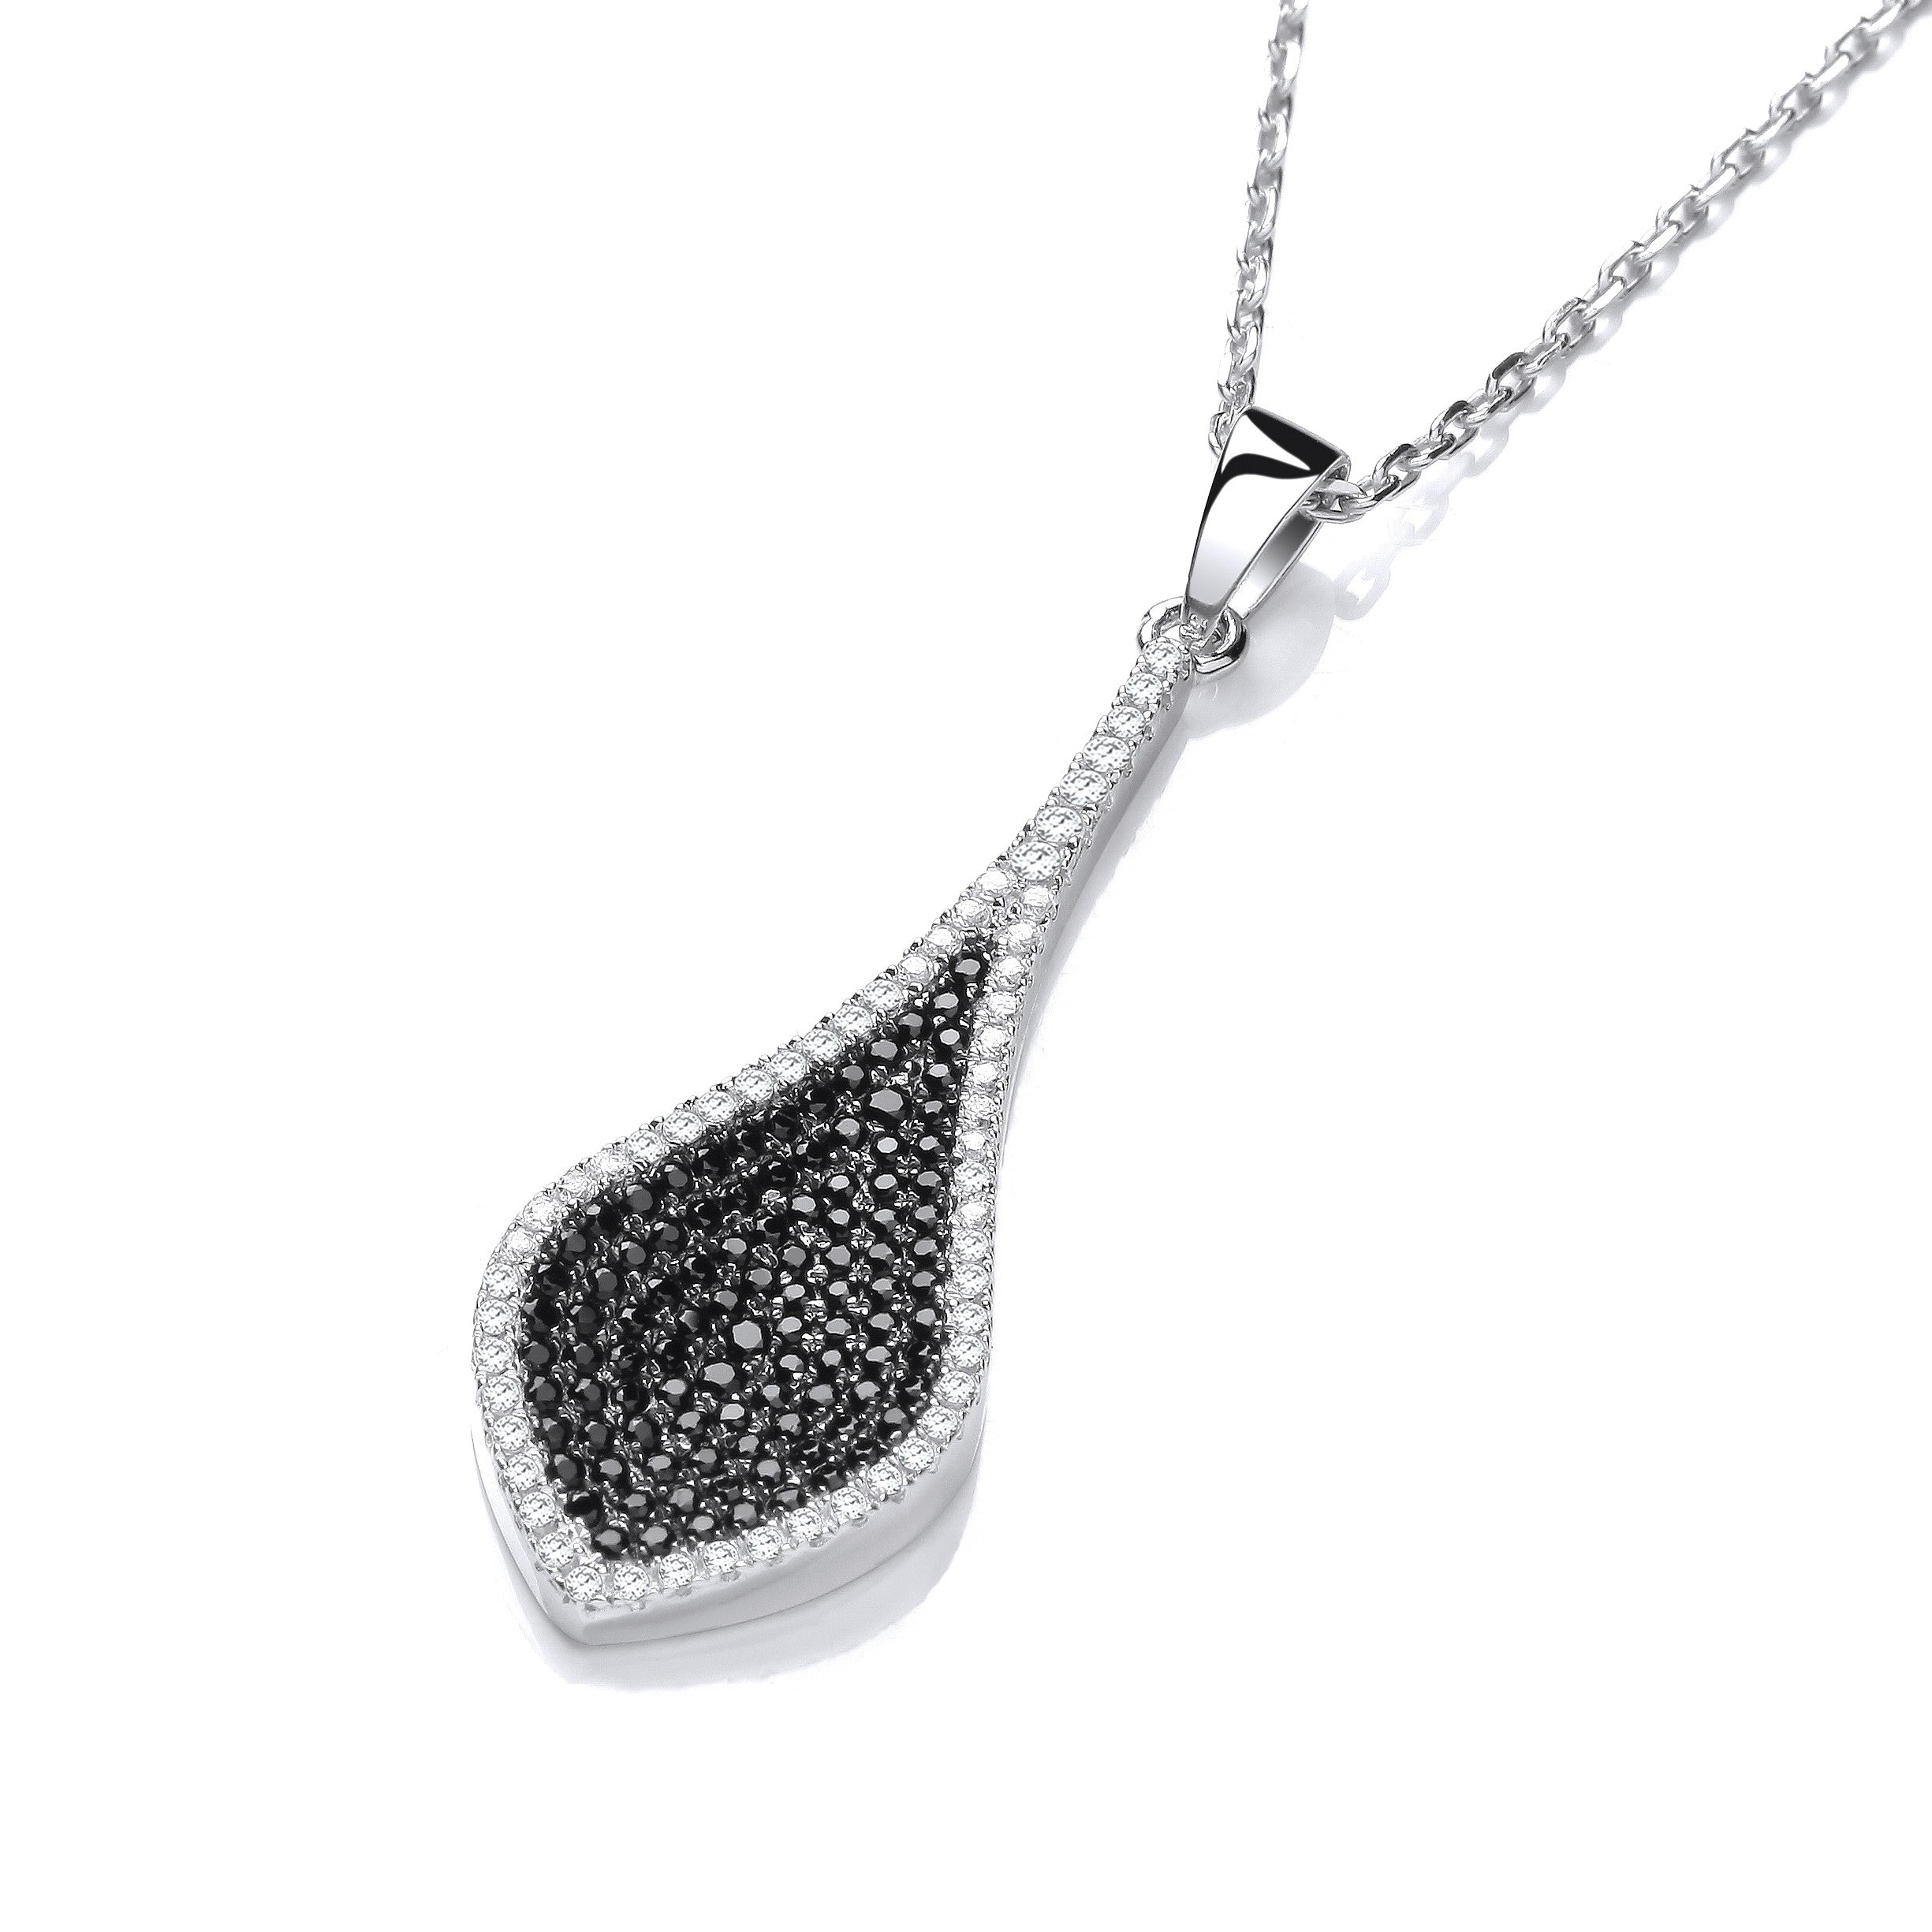 Micro Pave' Black & Clear Drop Pendant with 18" Chain